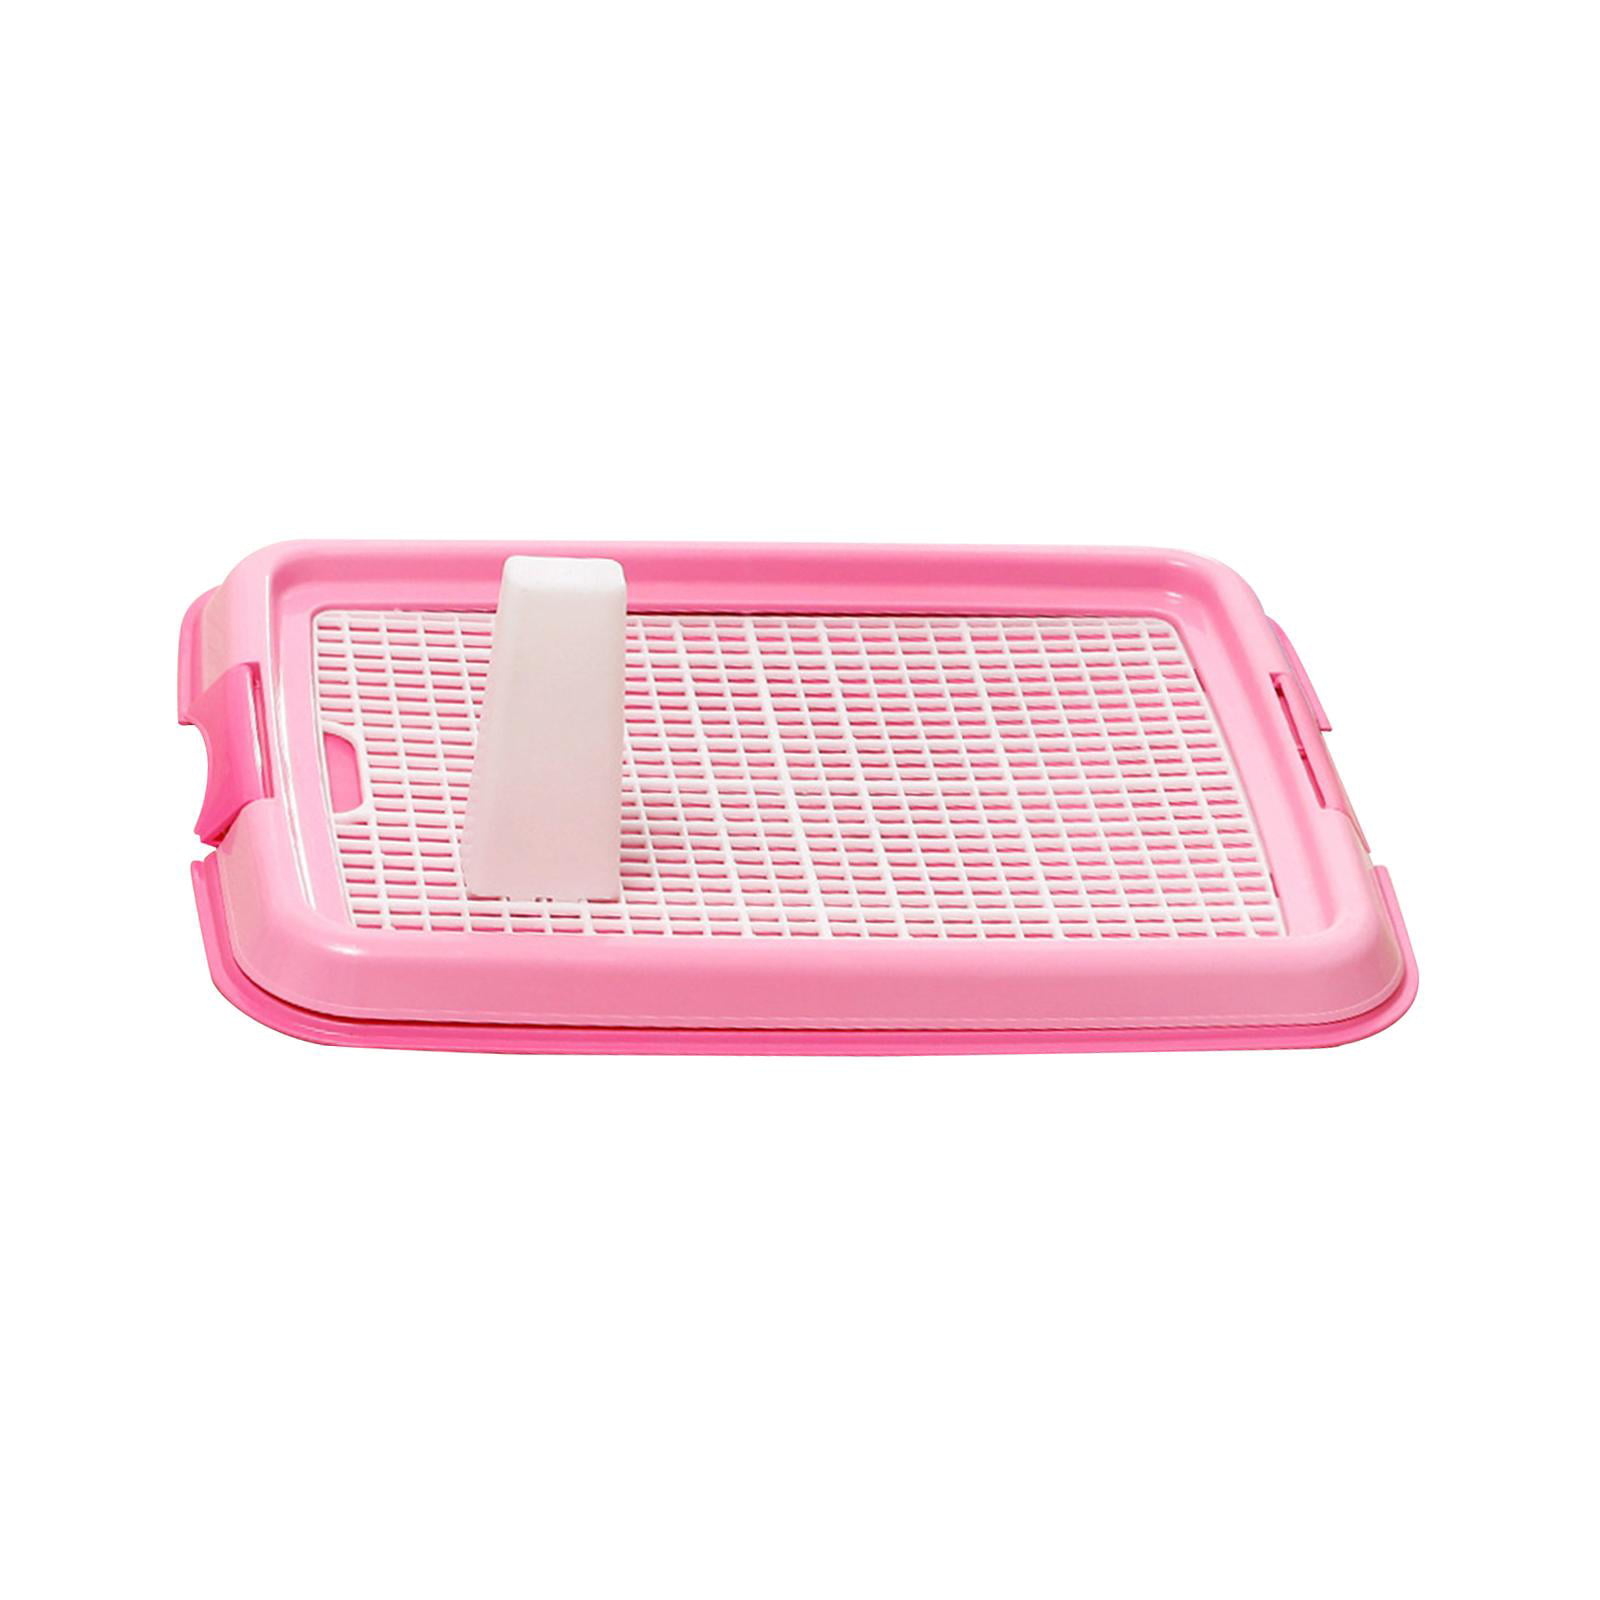  Gadpiparty Pet Toilet Wee Pads for Dogs Pee Pad Holder Pet  Training Puppy Indoor Dog Toilet Tray Puppy Pad Holder Tray with Grate  Puppy Sit Pad Puppy Training Pads Pink